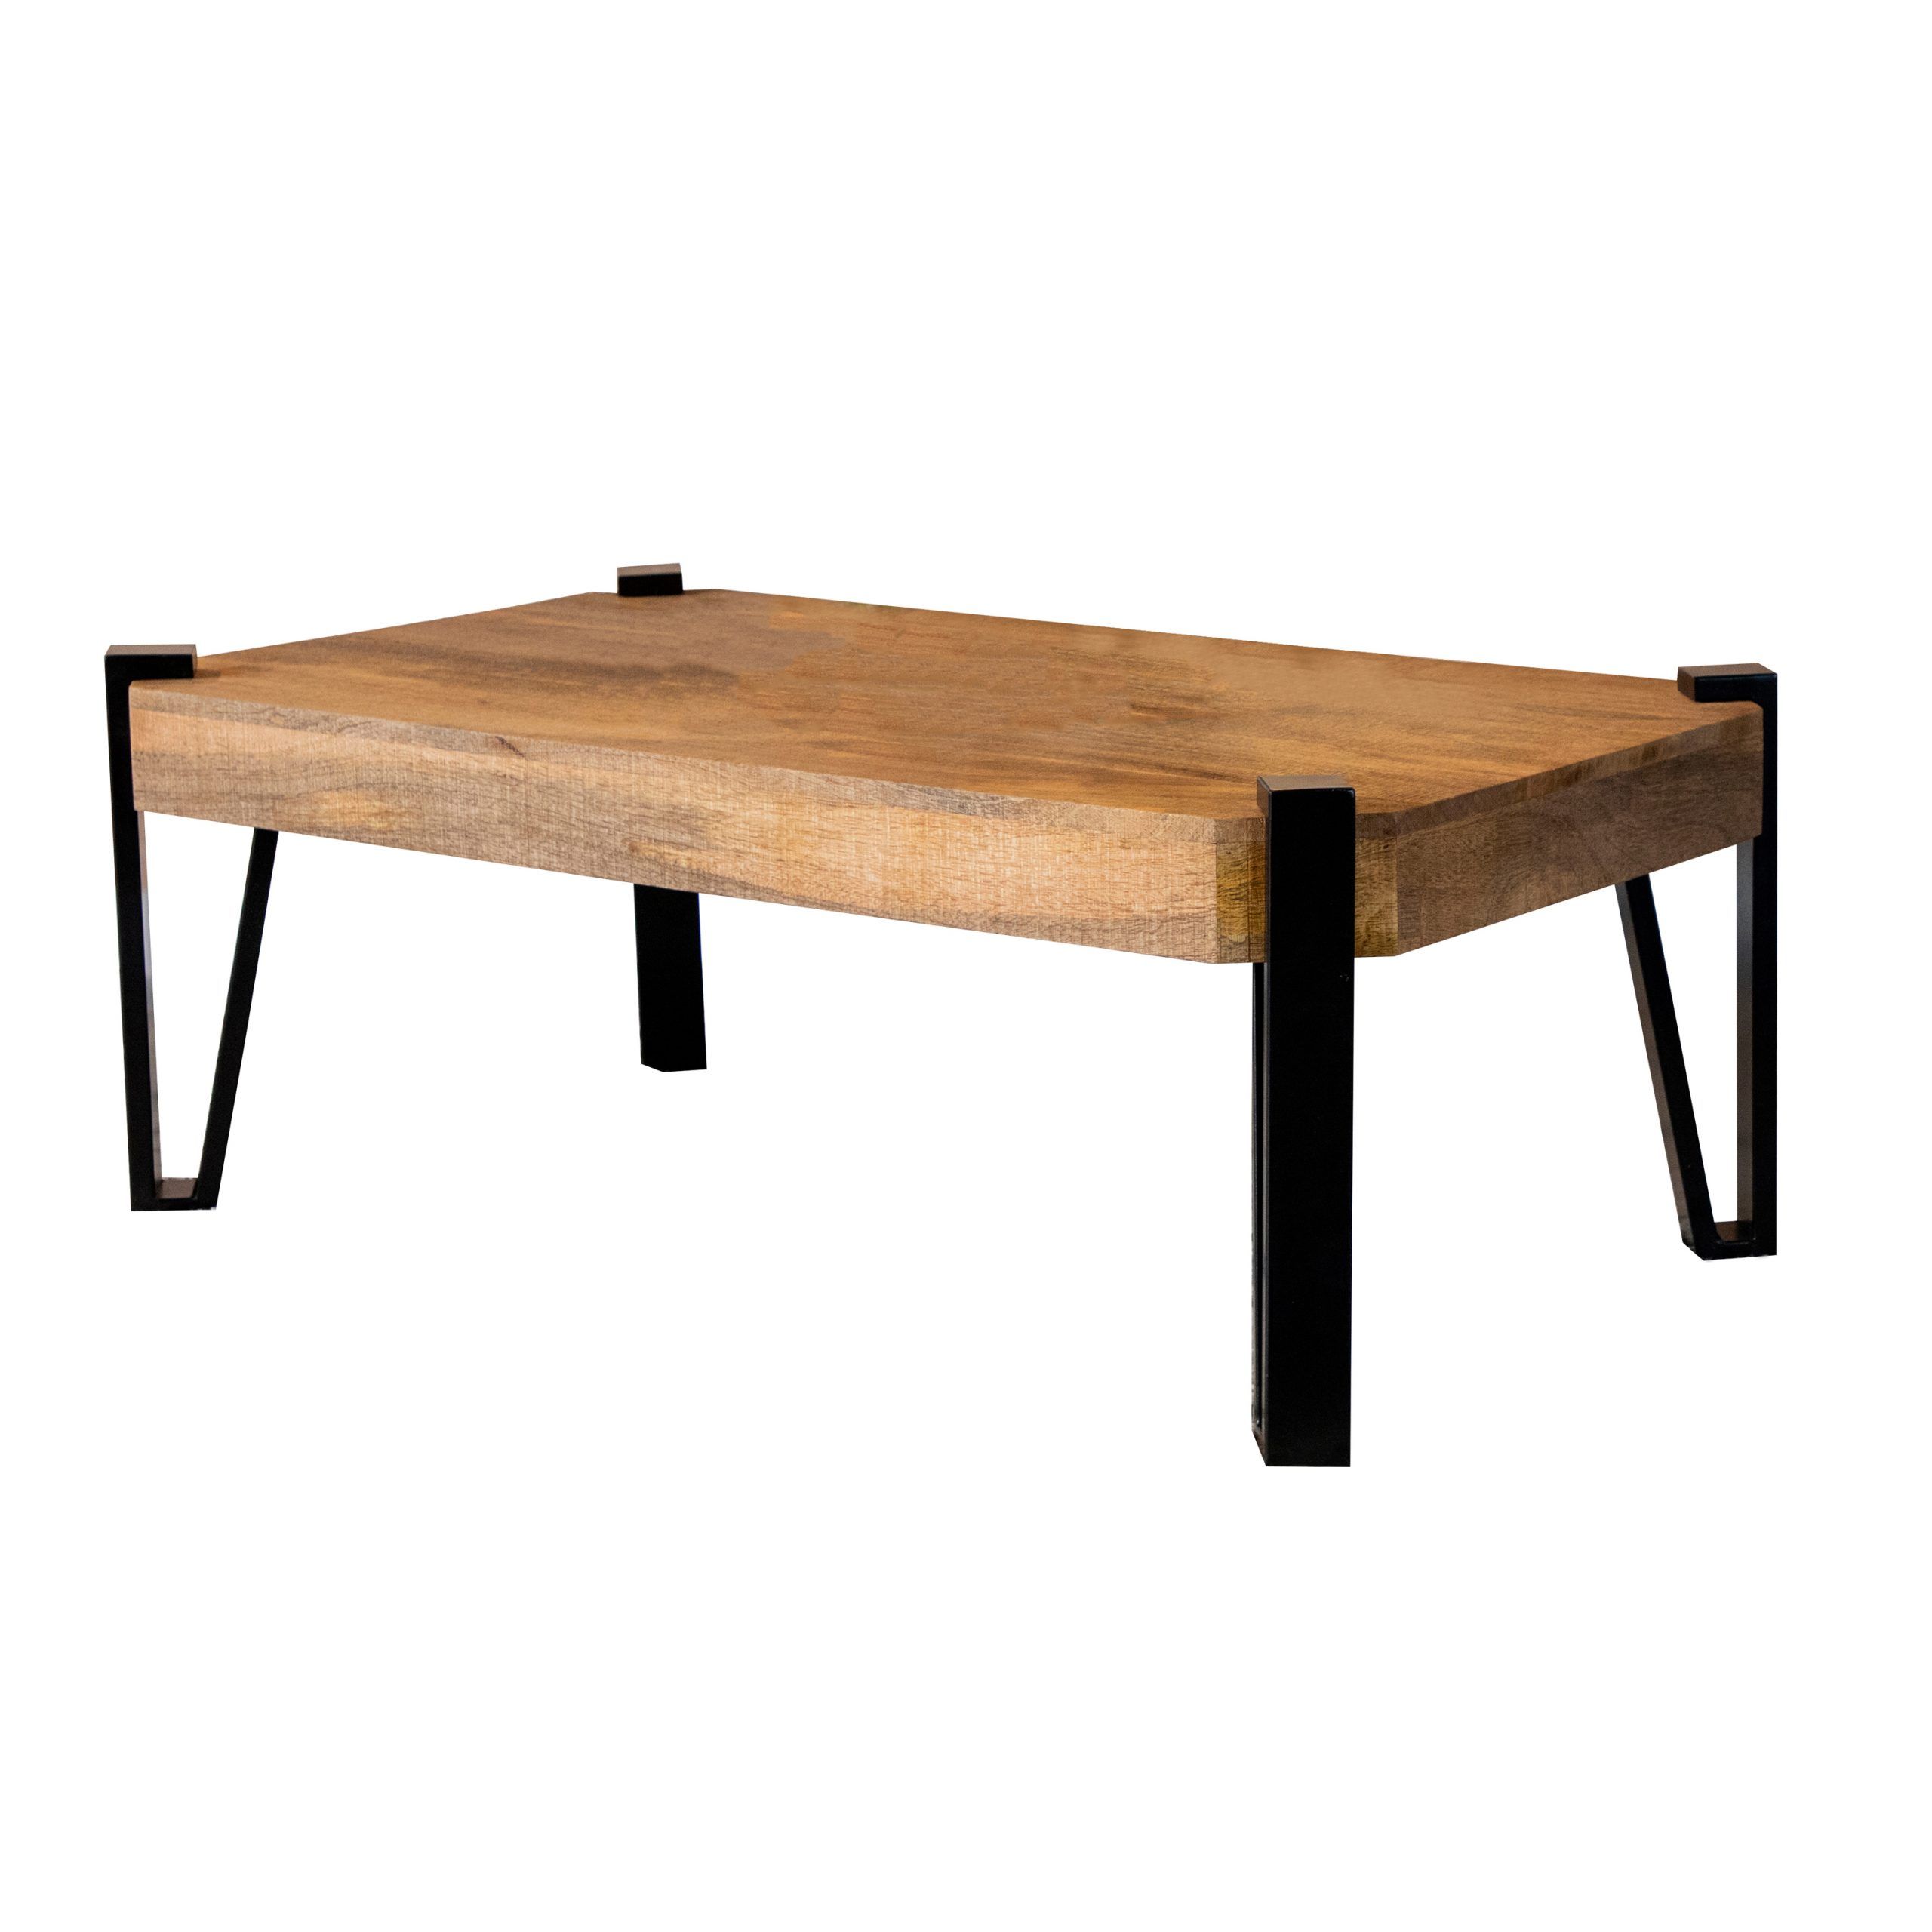 Wooden Rectangular Top Coffee Table Natural And Matte Black Regarding Well Known Matte Black Coffee Tables (View 5 of 10)